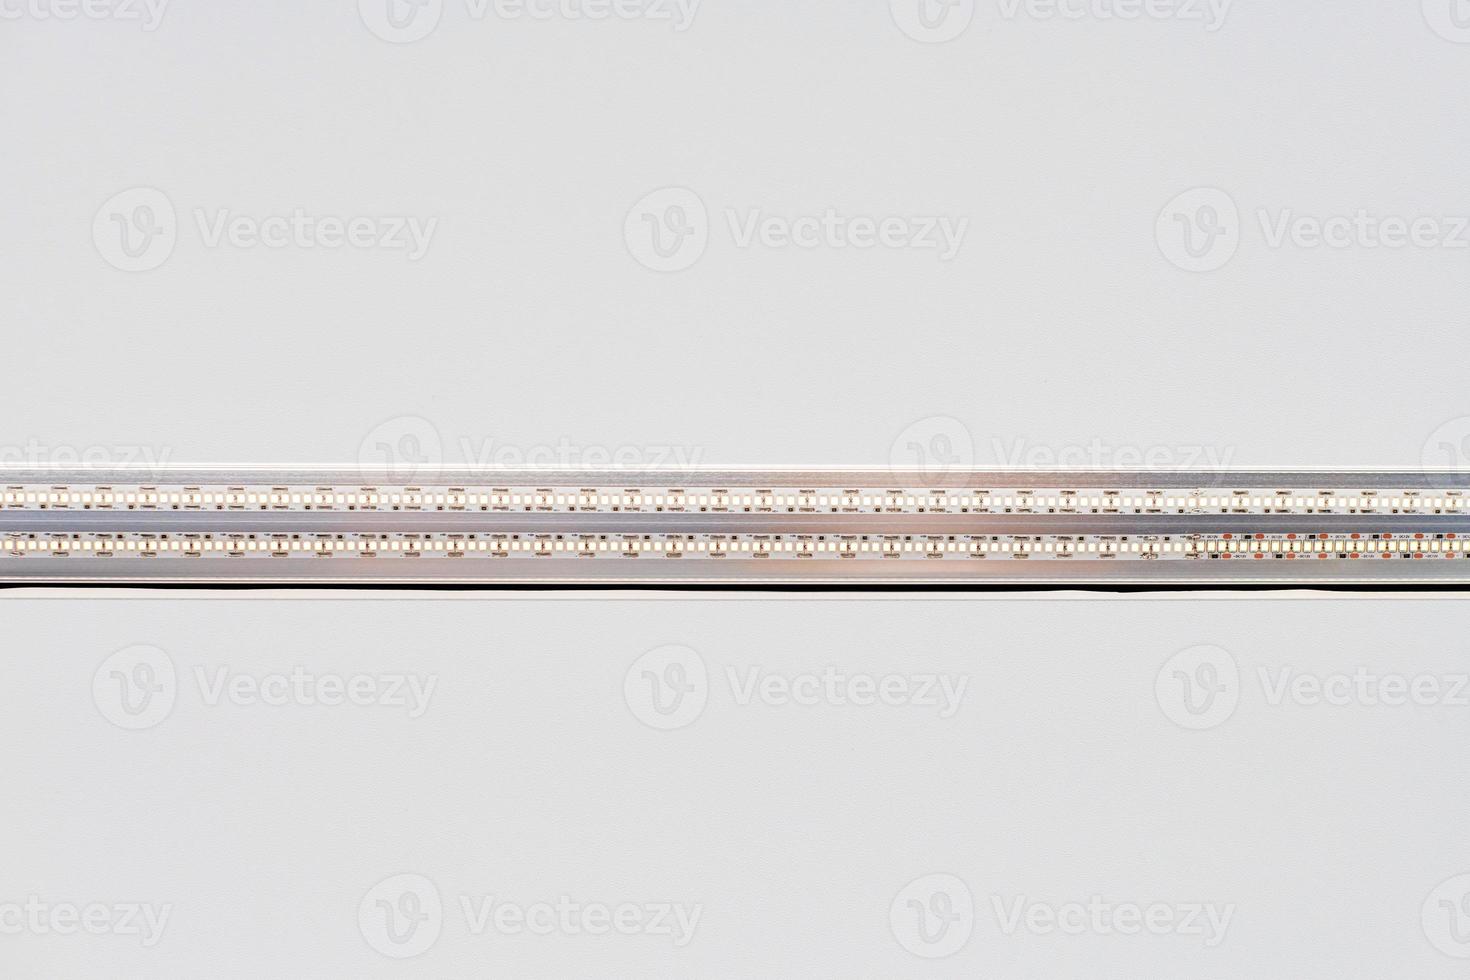 Strip LED light with aluminum profile on white stretch ceiling, modern construction, close up photo